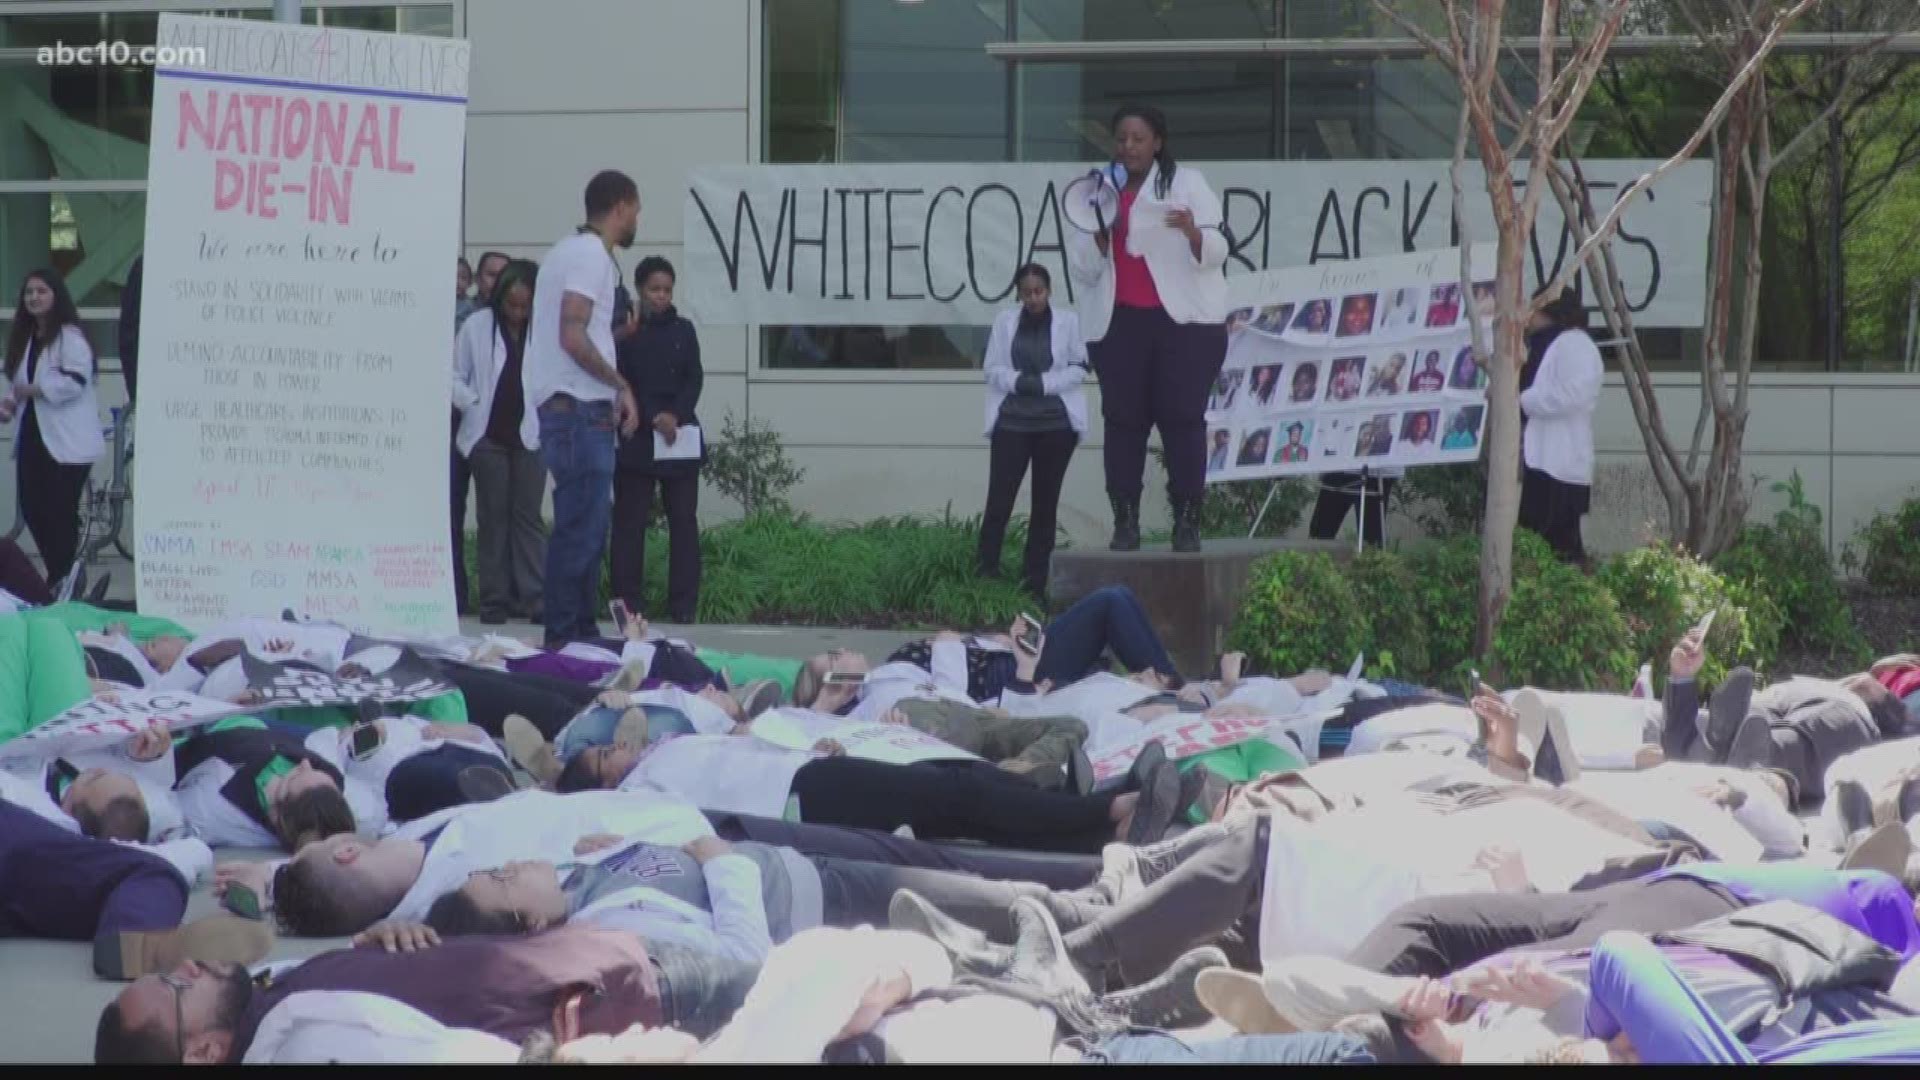 Students at the UC Davis School of Medicine participated in a 'die-in' protest in response to the shooting and killing of Stephon Clark. (April 17, 2018)